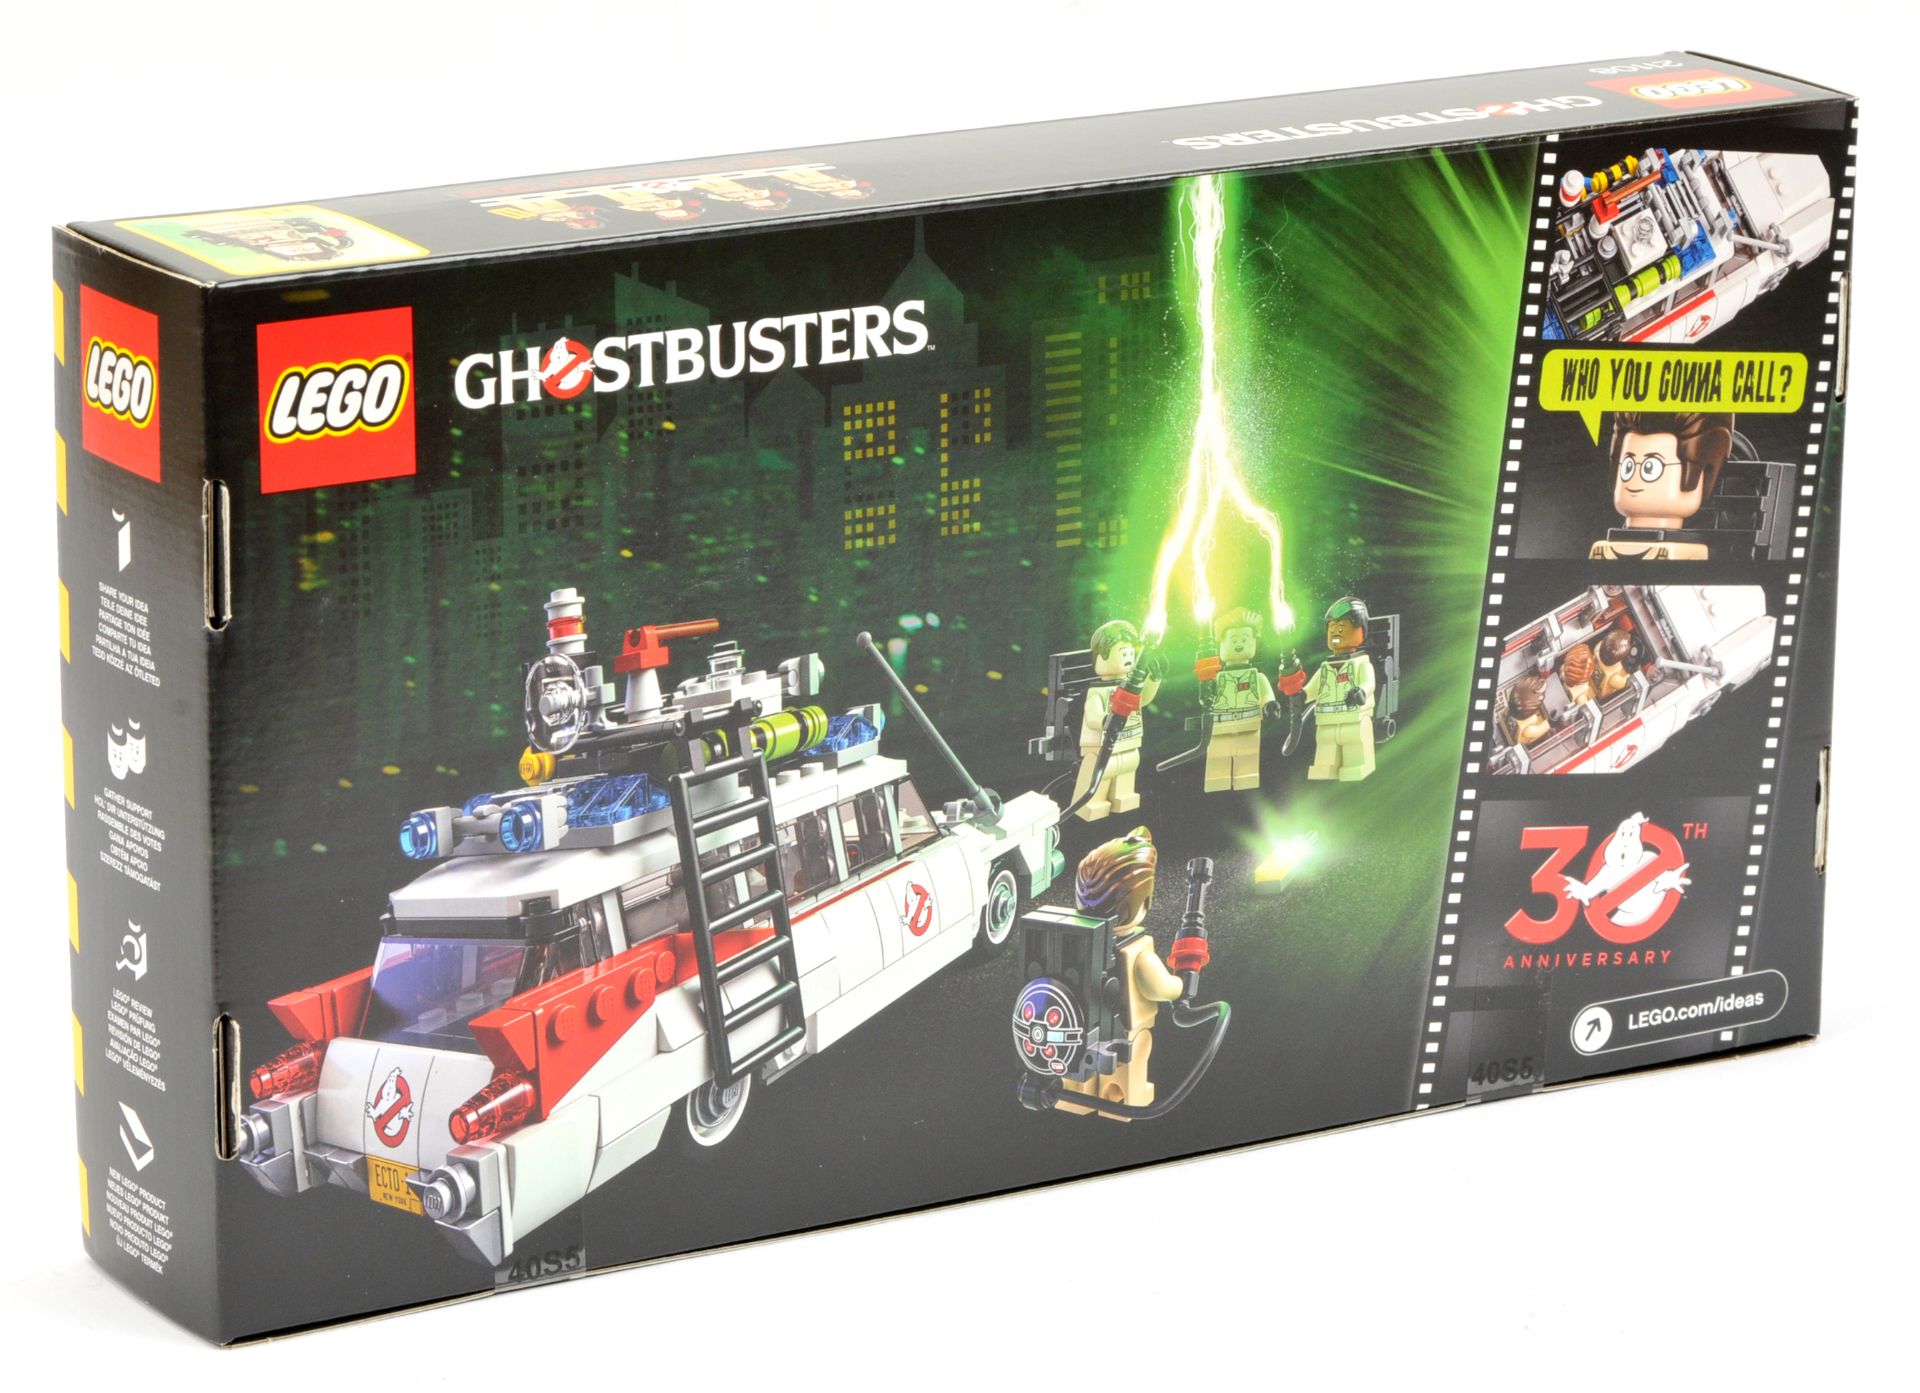 Lego 21108 Ghostbusters Ecto-1 within Excellent Plus sealed packaging (light crease on one corner). - Bild 2 aus 2